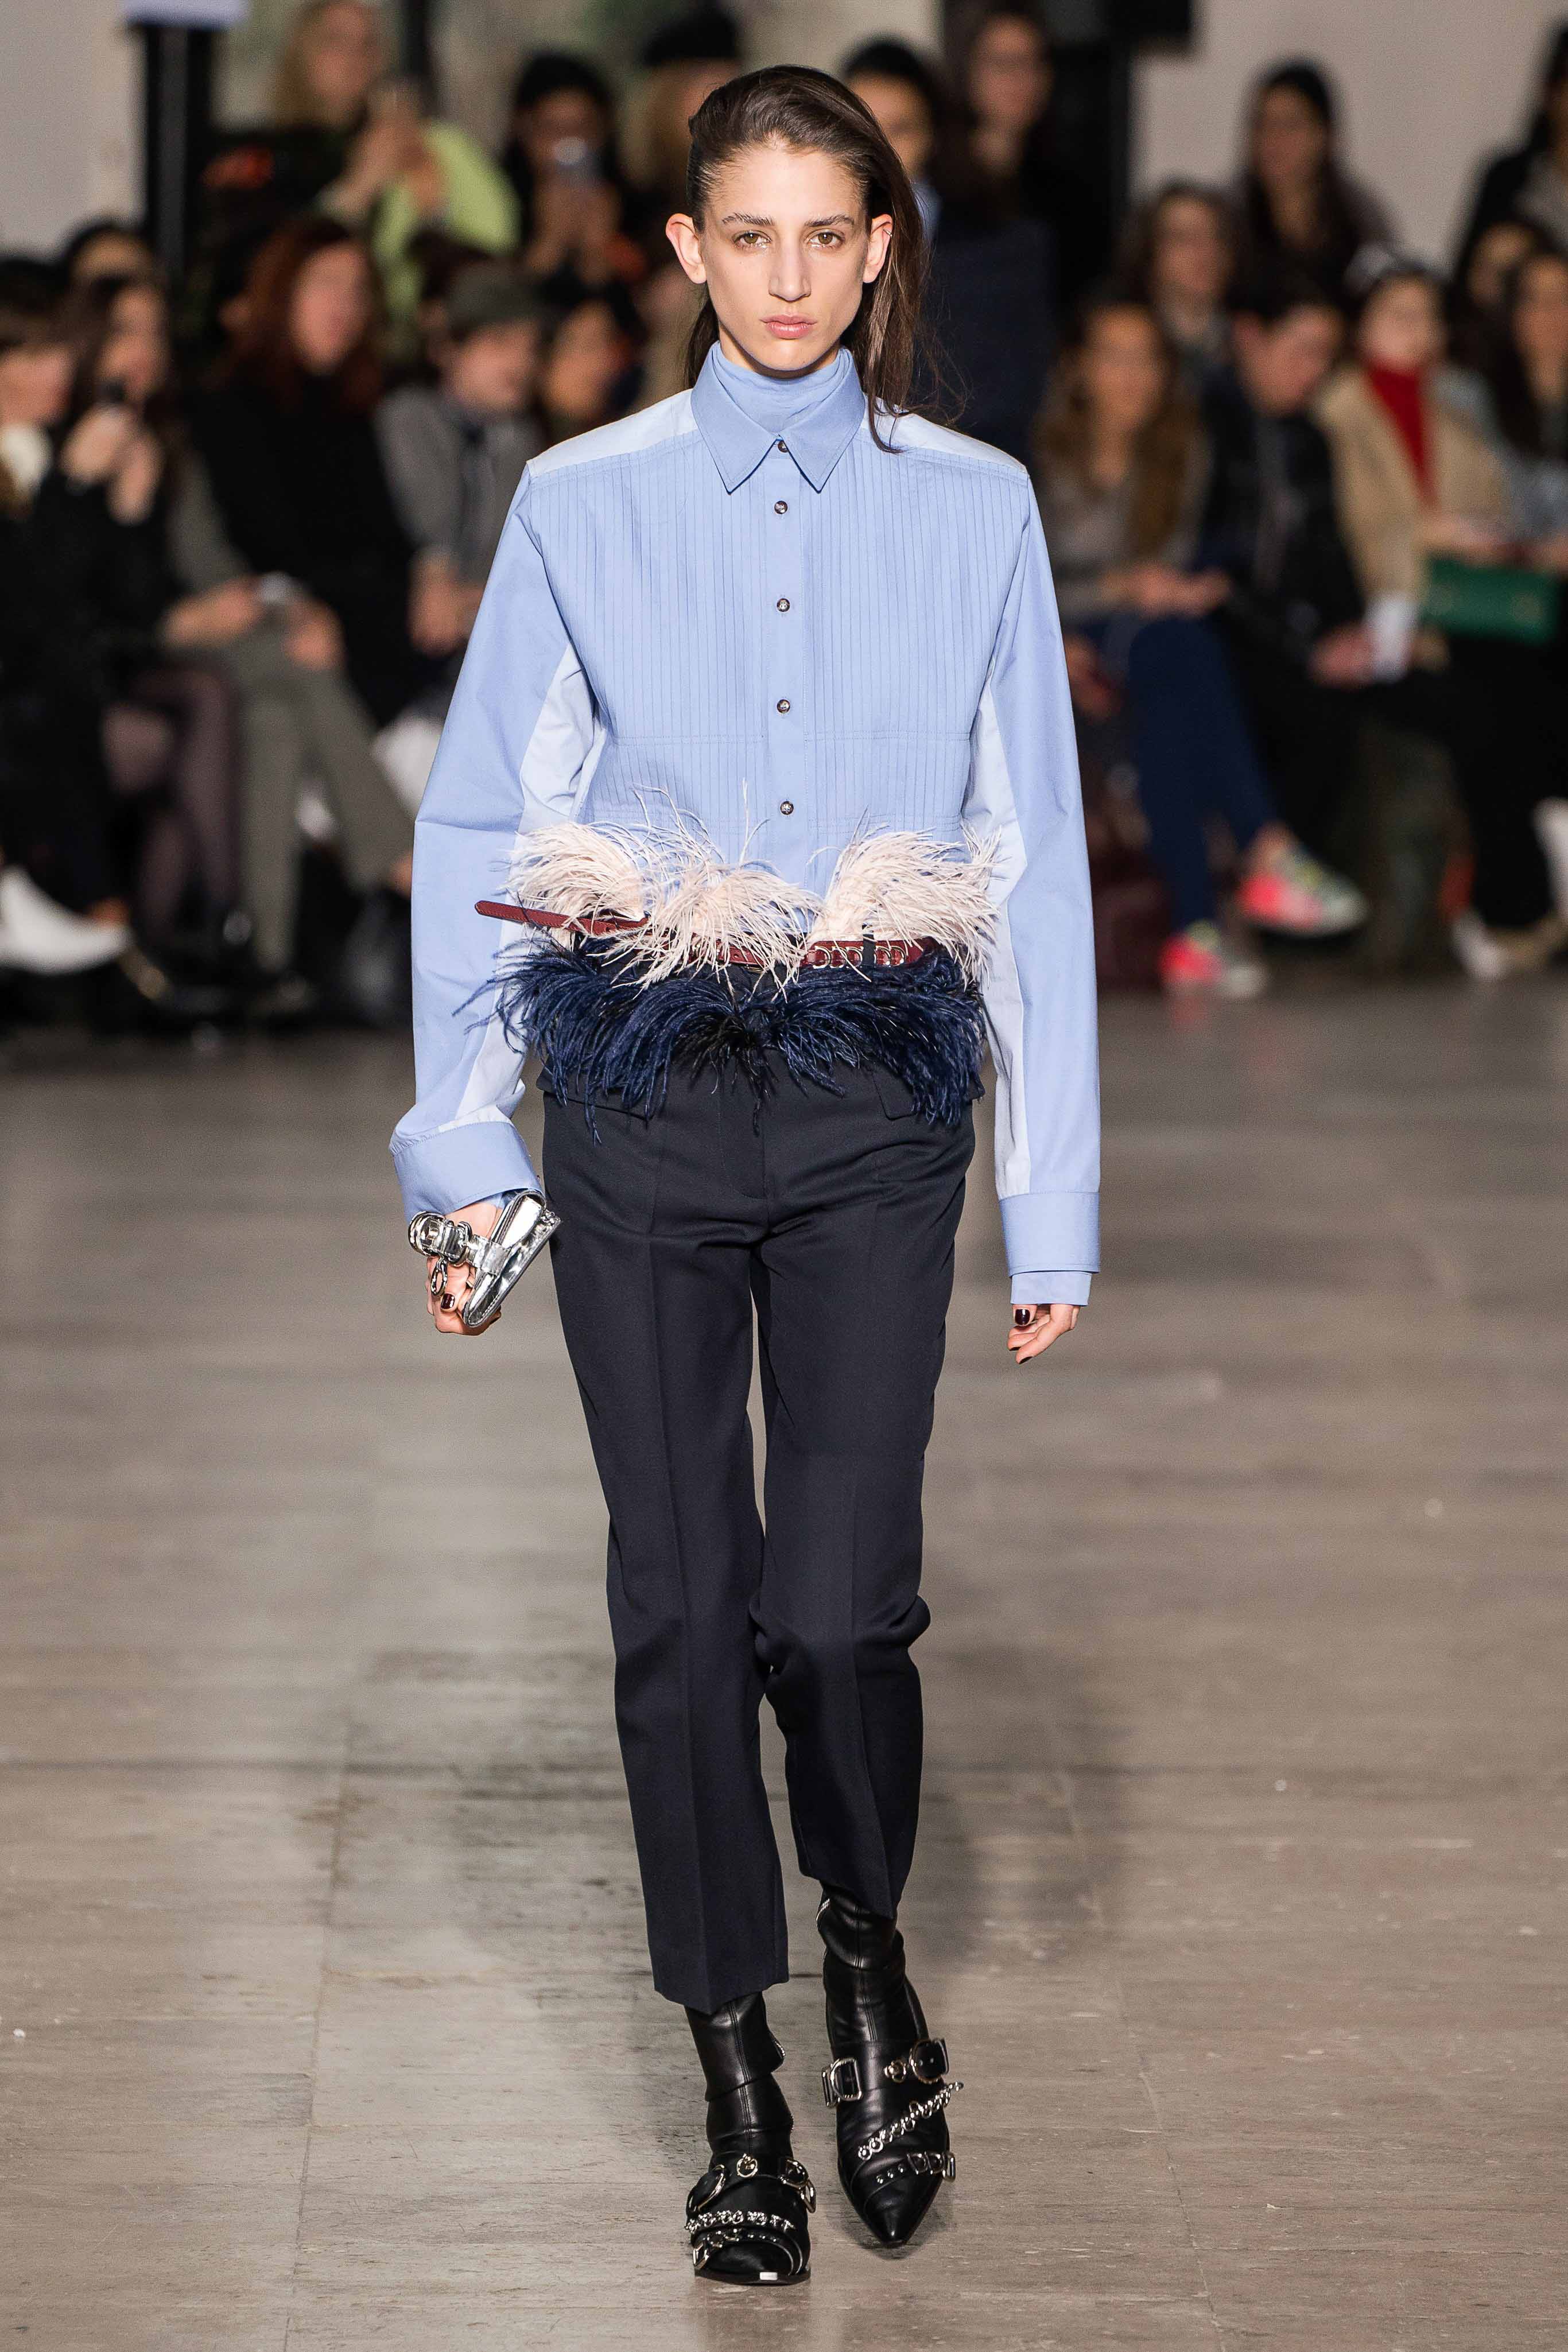 Fall Winter 2019 2020 Trends - Fashion Week Coverage